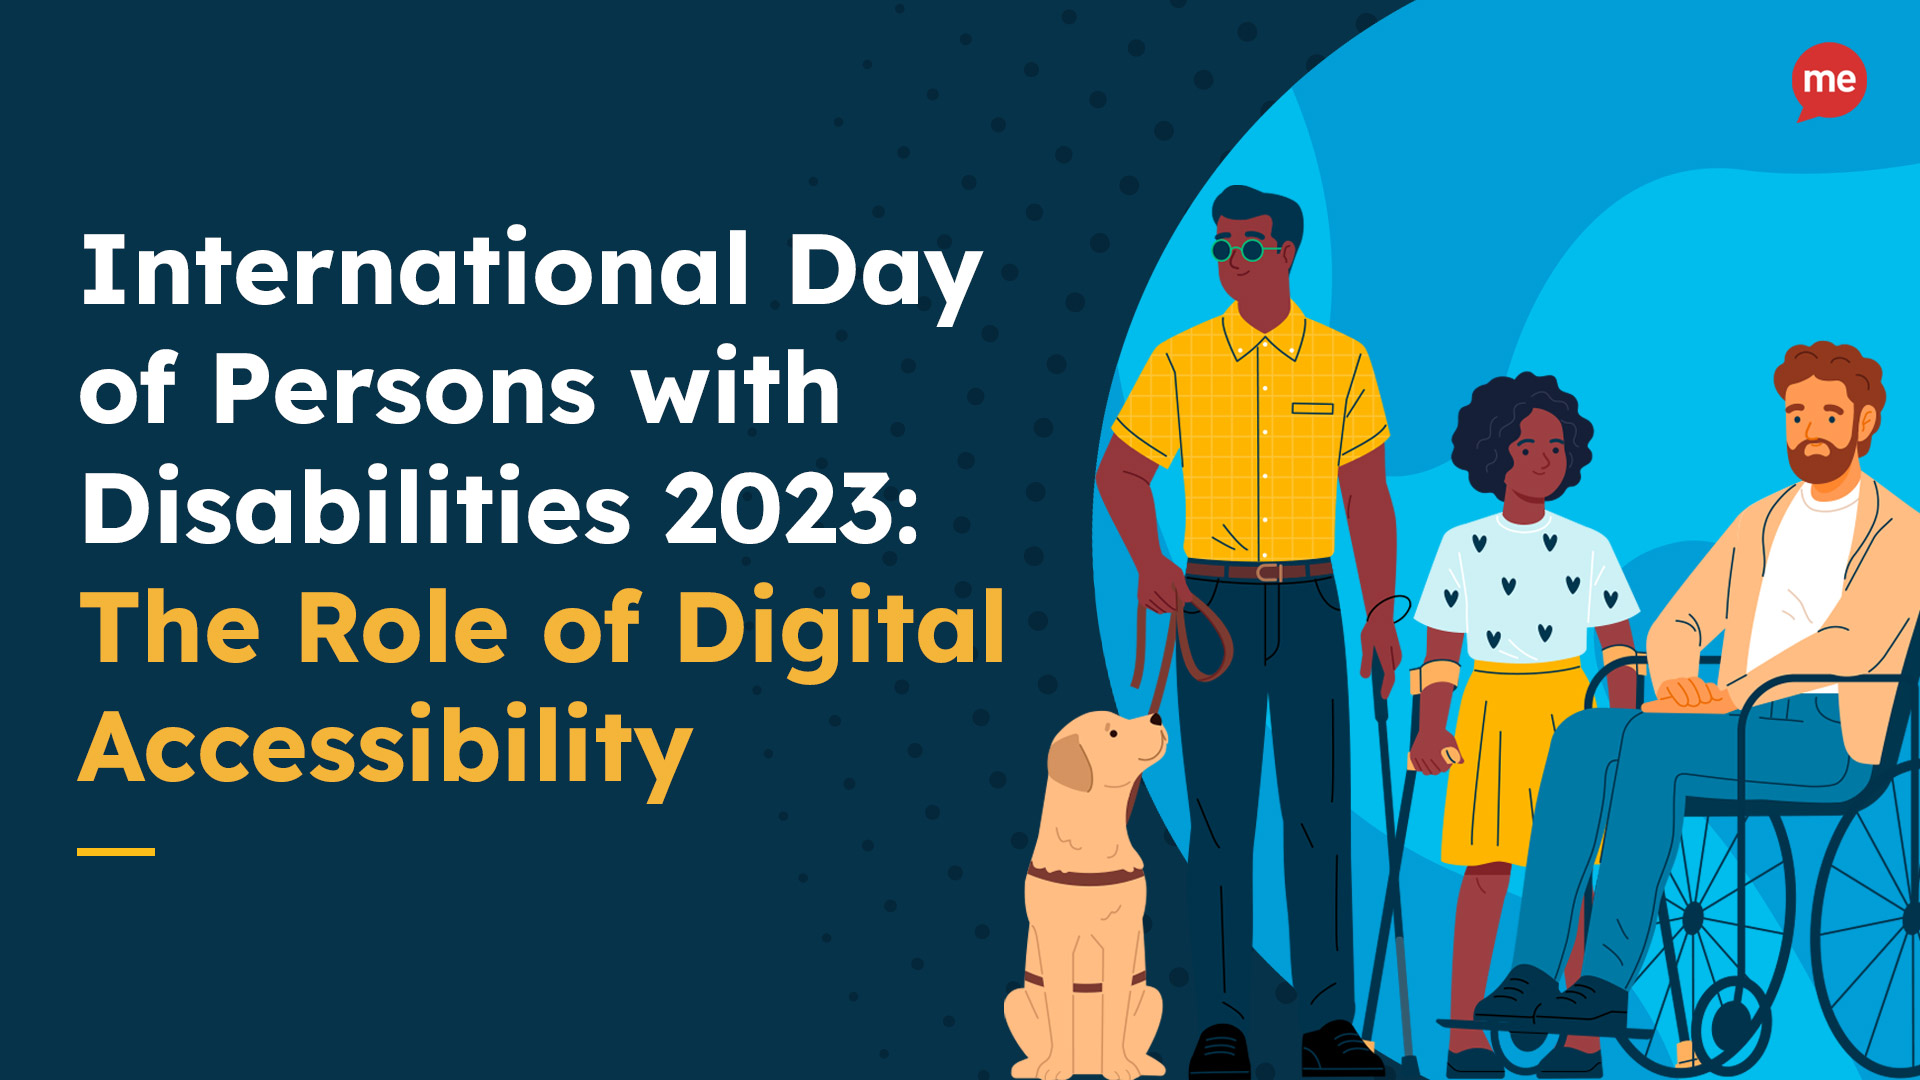 International Day of Persons with Disabilities 2023: The Role of Digital Accessibility